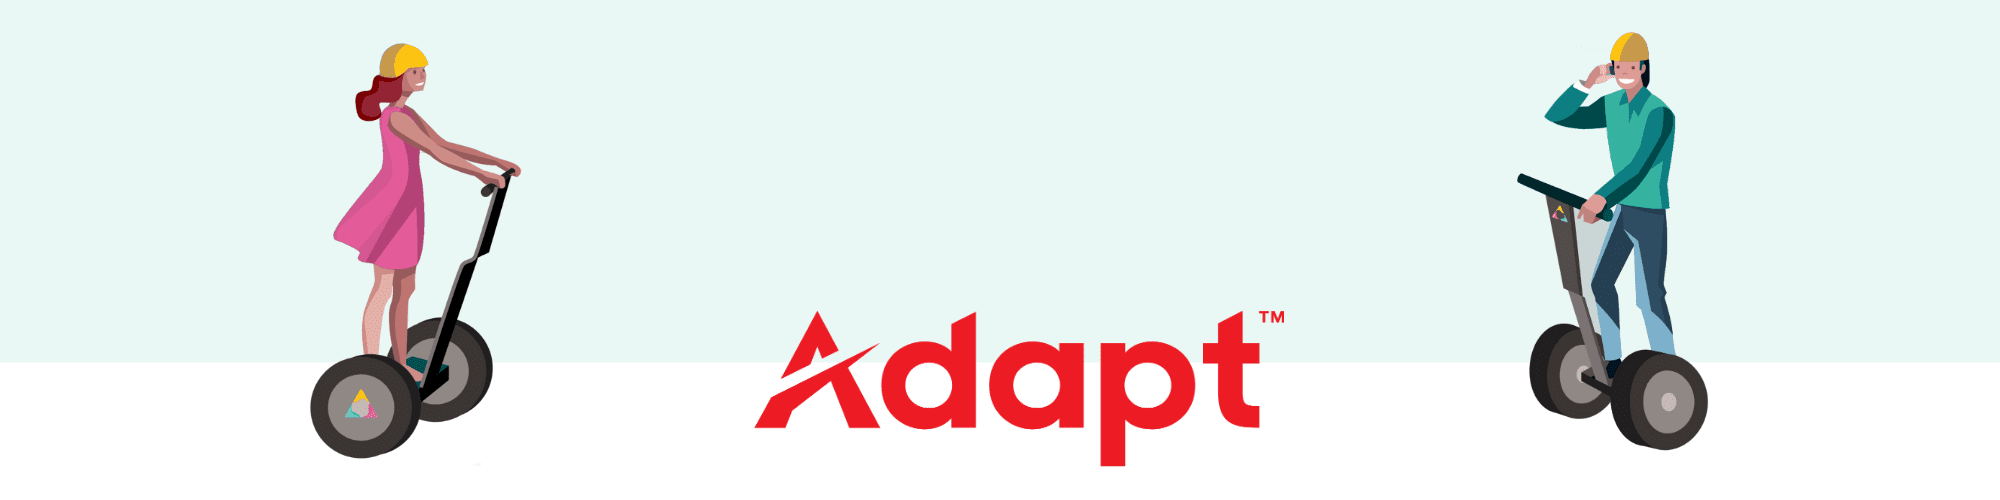 Best Adapt Tips for Recruiters